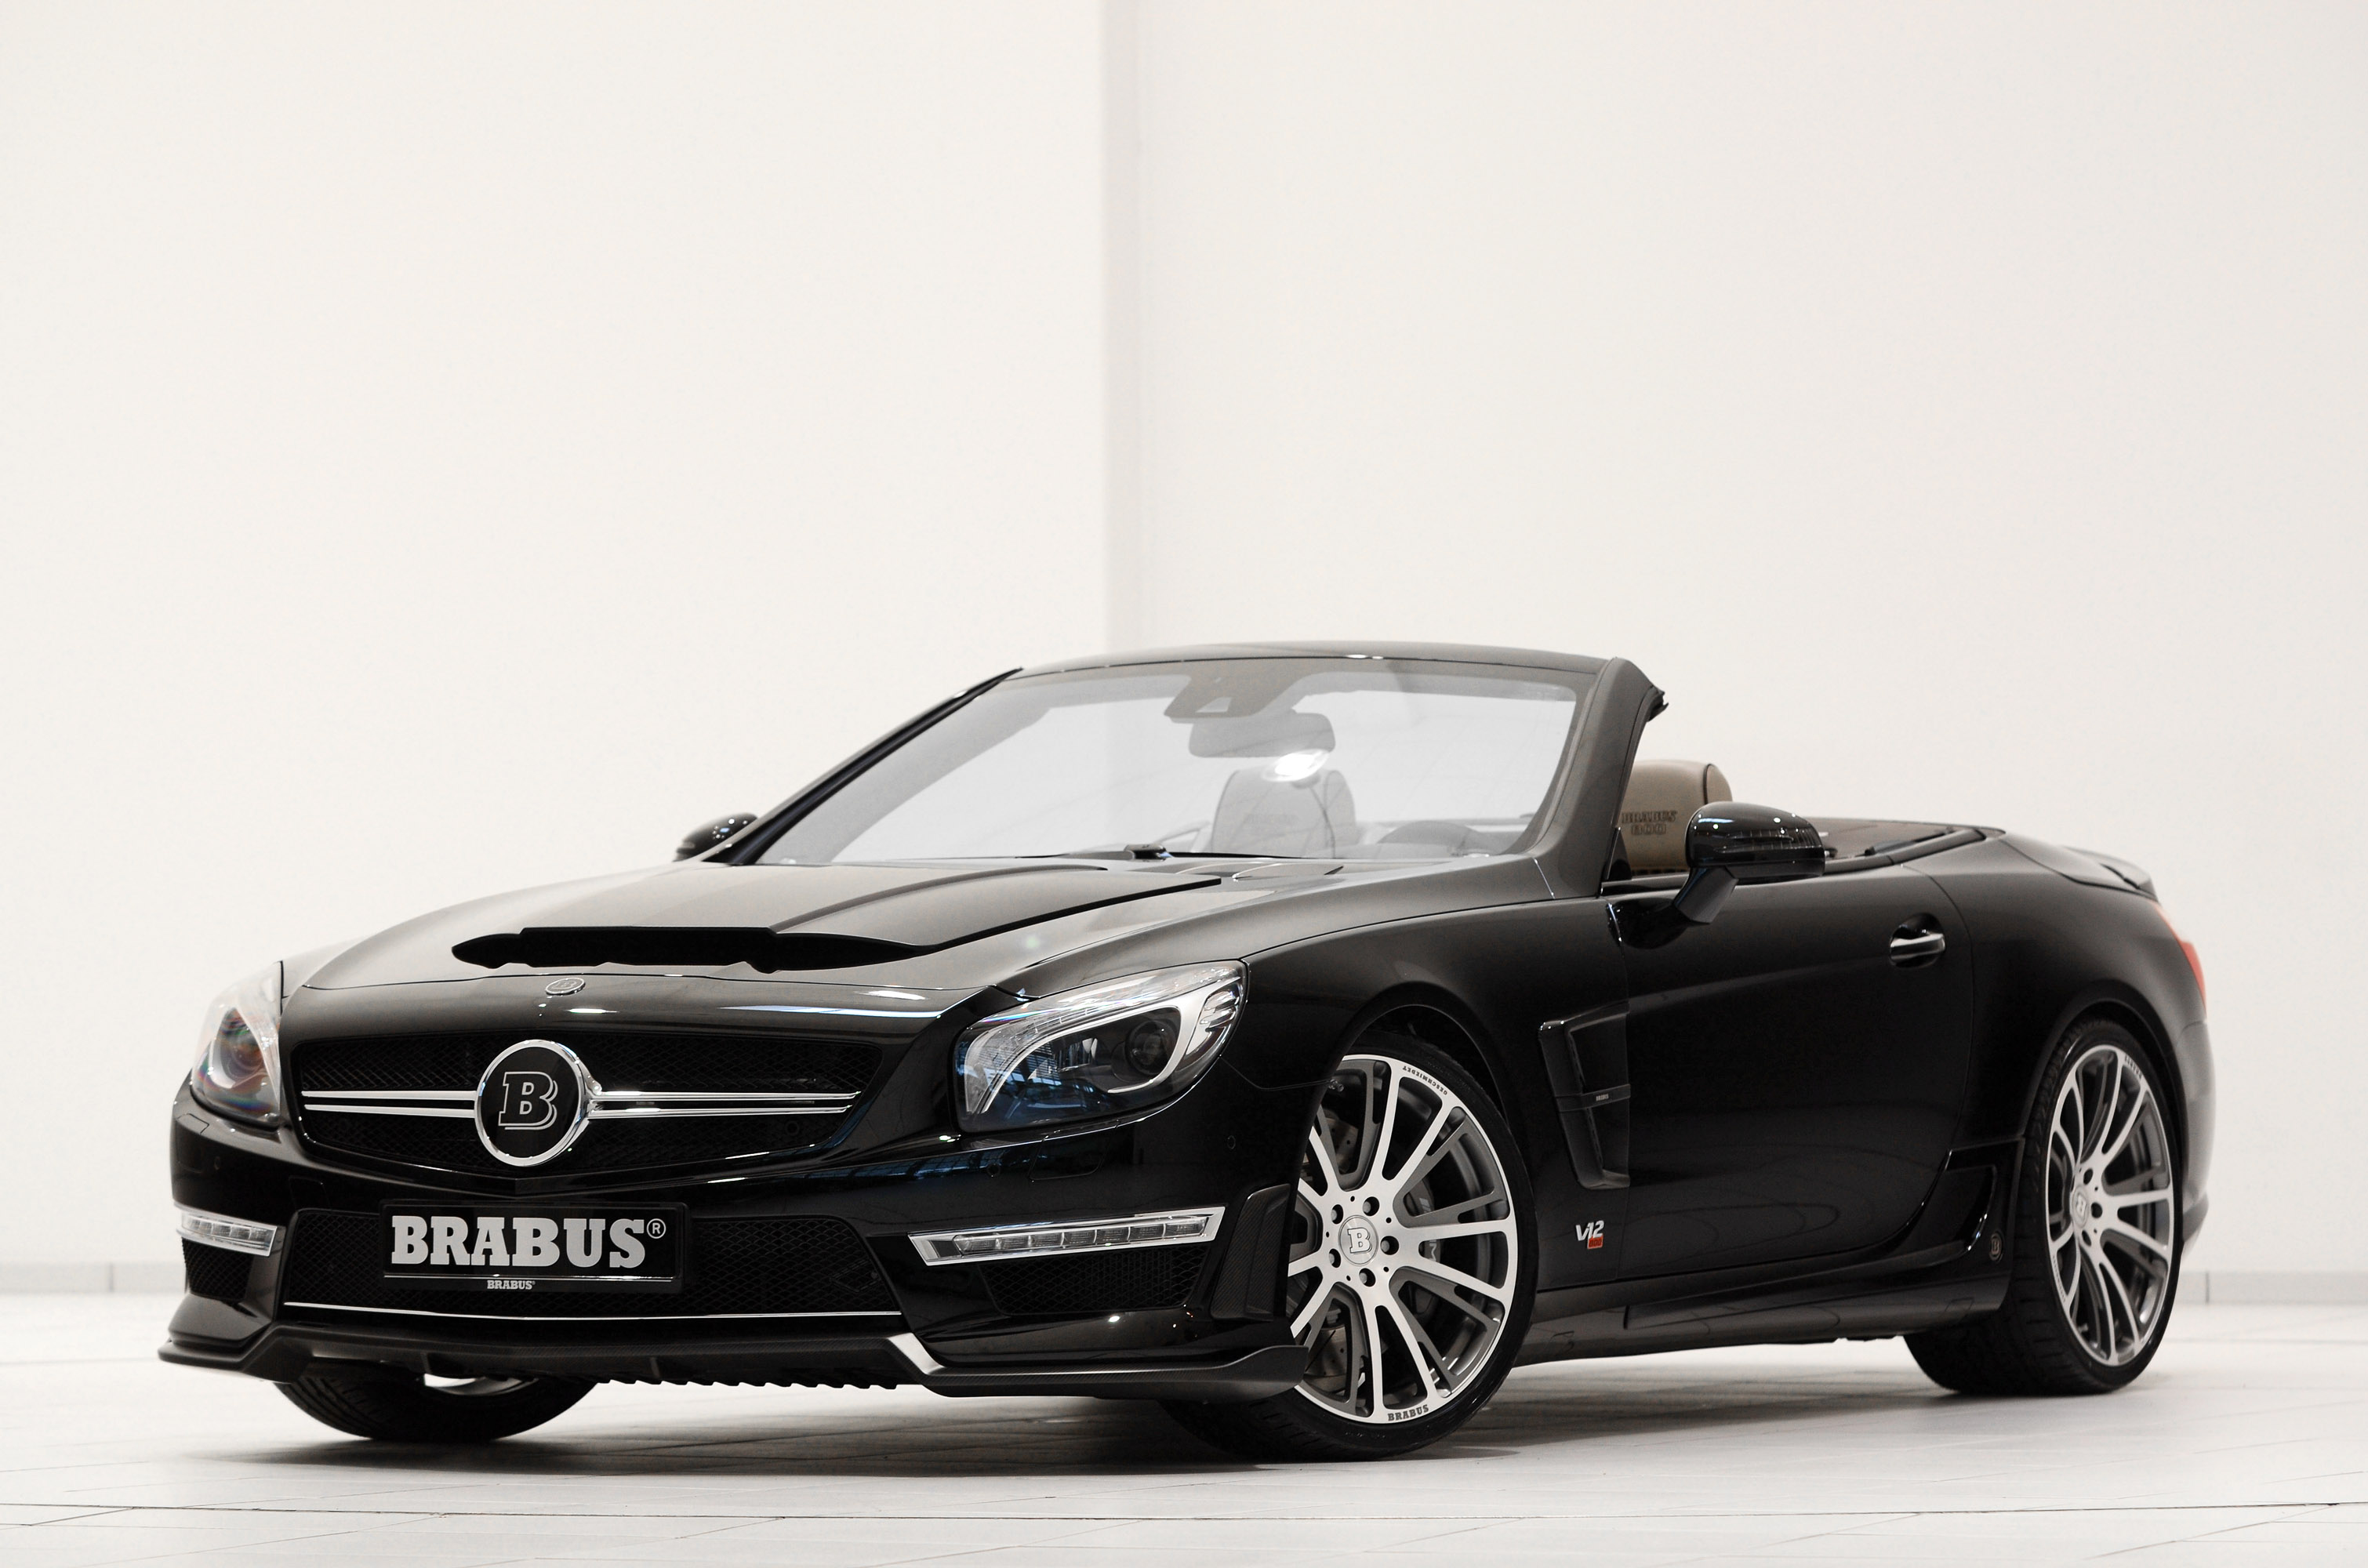 Nice wallpapers Brabus 800 Roadster 3020x2000px